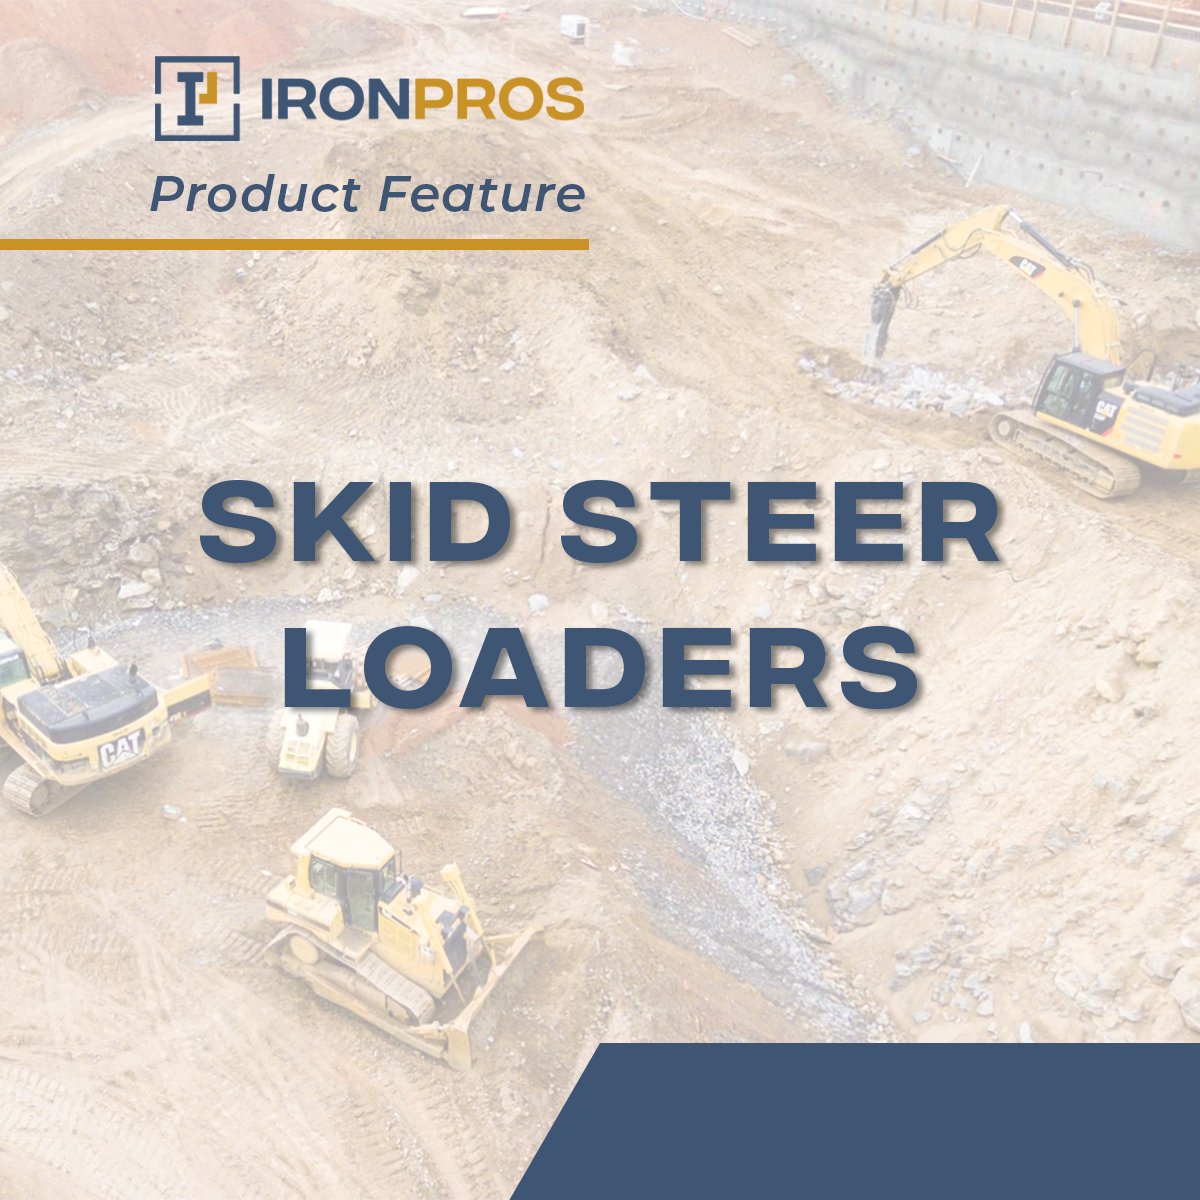 THREAD: It's time for your weekly product feature! Check out some of the most viewed skid steer loaders in the IRONPROS showroom.

#ironpros #constructionequipment #skidsteers